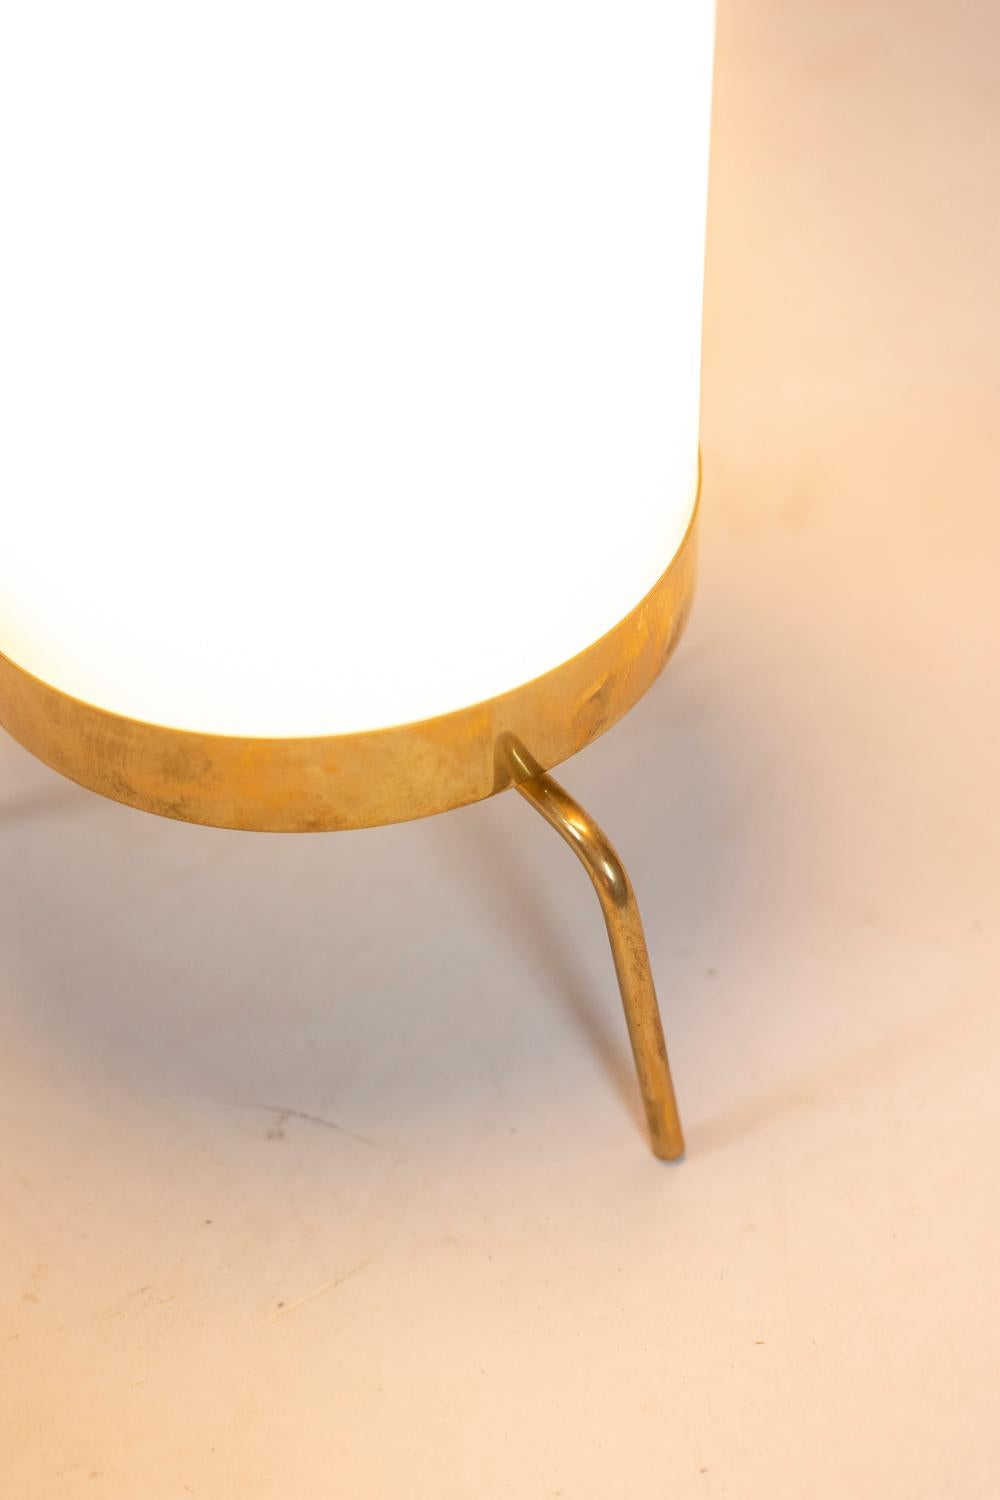 Lamp in white opaline and golden brass, circular and tube-shaped. Tripod shaped base.

Italian work realized in the 1970s.
